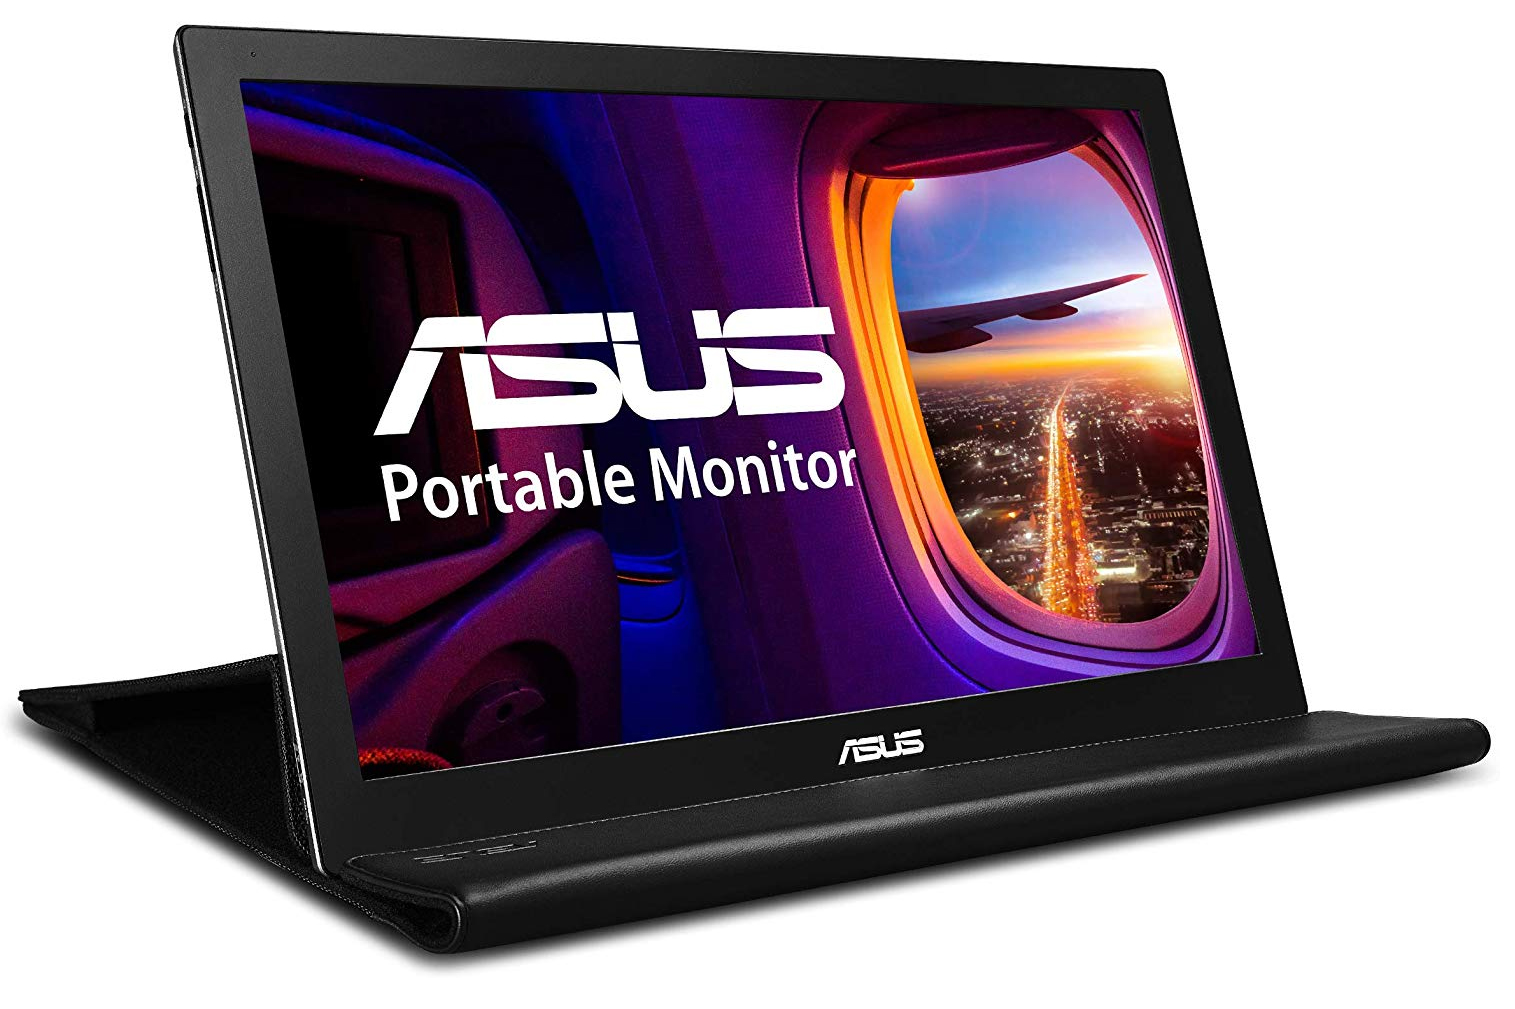 Asus Mb169 ?quality=65&strip=all